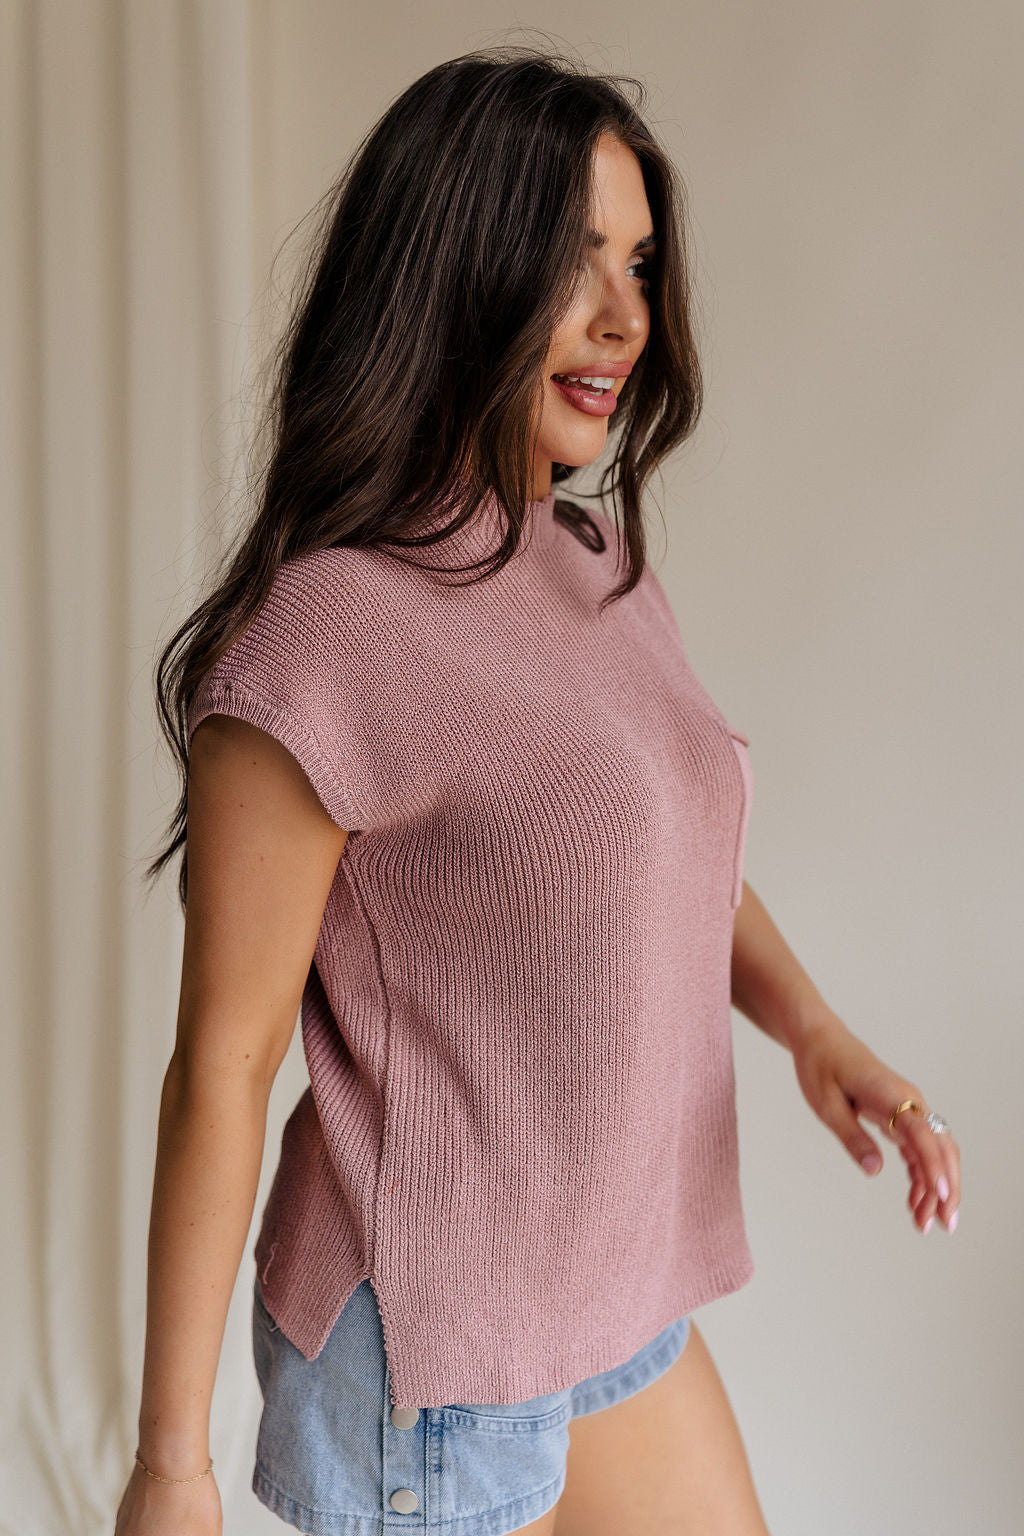 side view of female model wearing the Arana Knit Short Sleeve Top which features Lightweight Knit Fabric, Slight Slit Details, Front Left Chest Pocket, Round Neckline and Short Sleeves. the top is available in beige and mauve